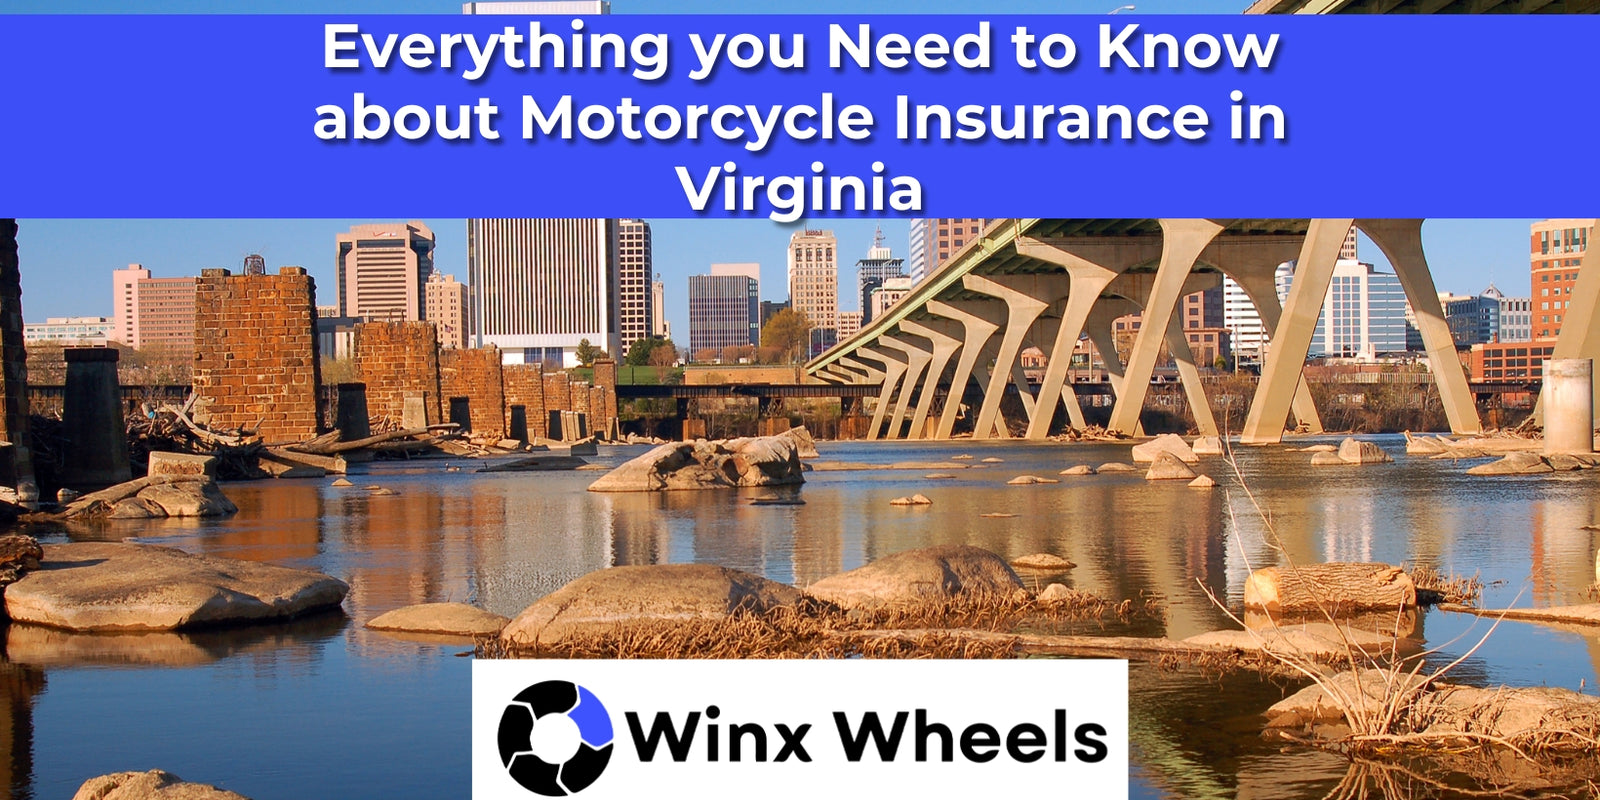 Everything you Need to Know about Motorcycle Insurance in Virginia